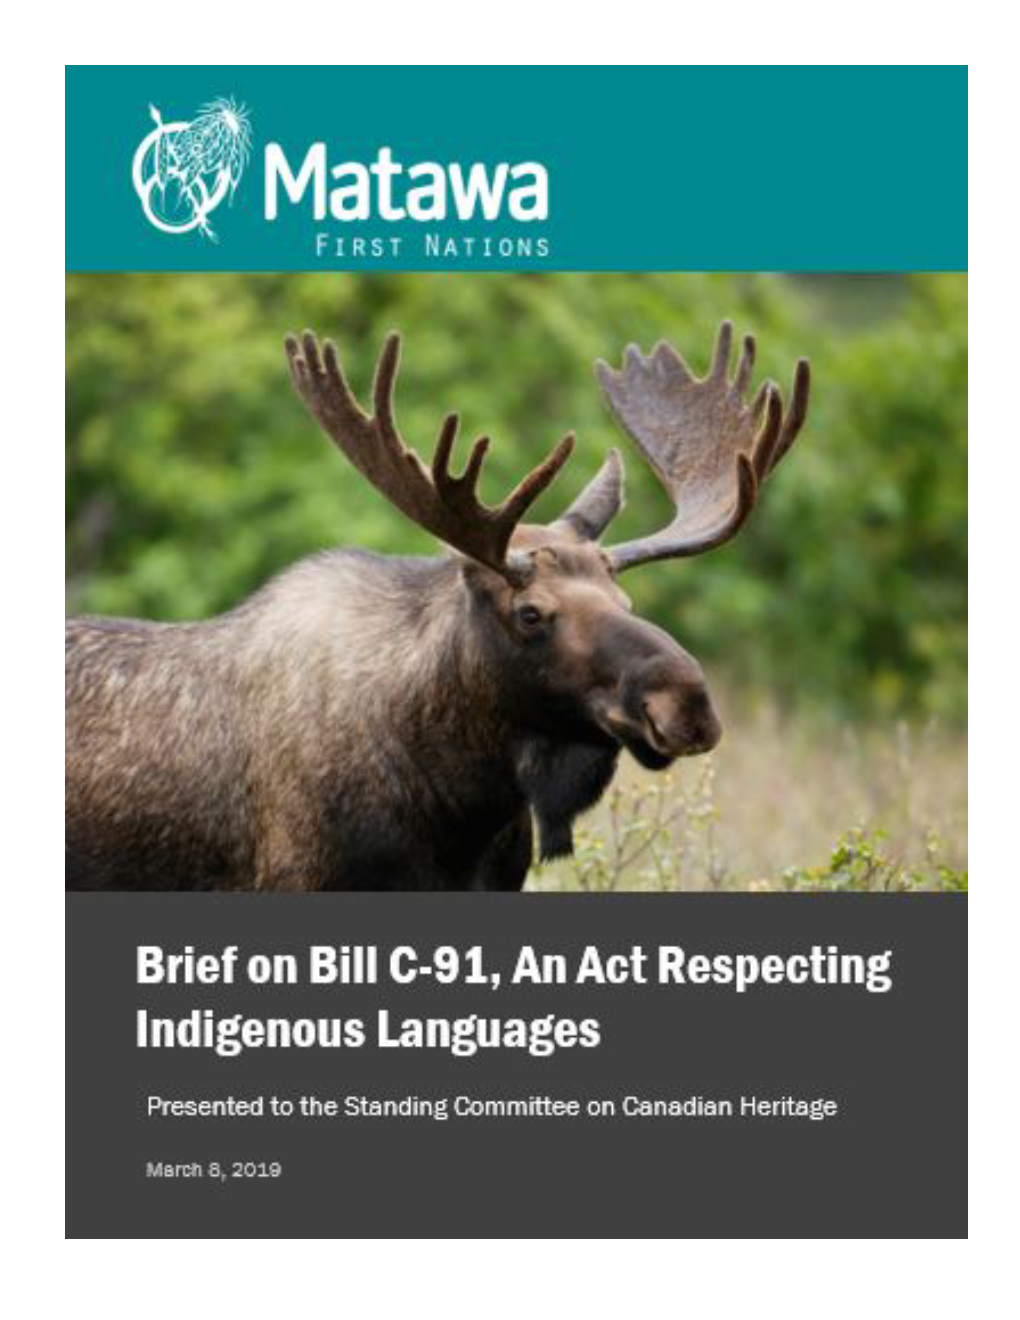 Brief to the Standing Committee on Canadian Heritage on Bill C-91, An